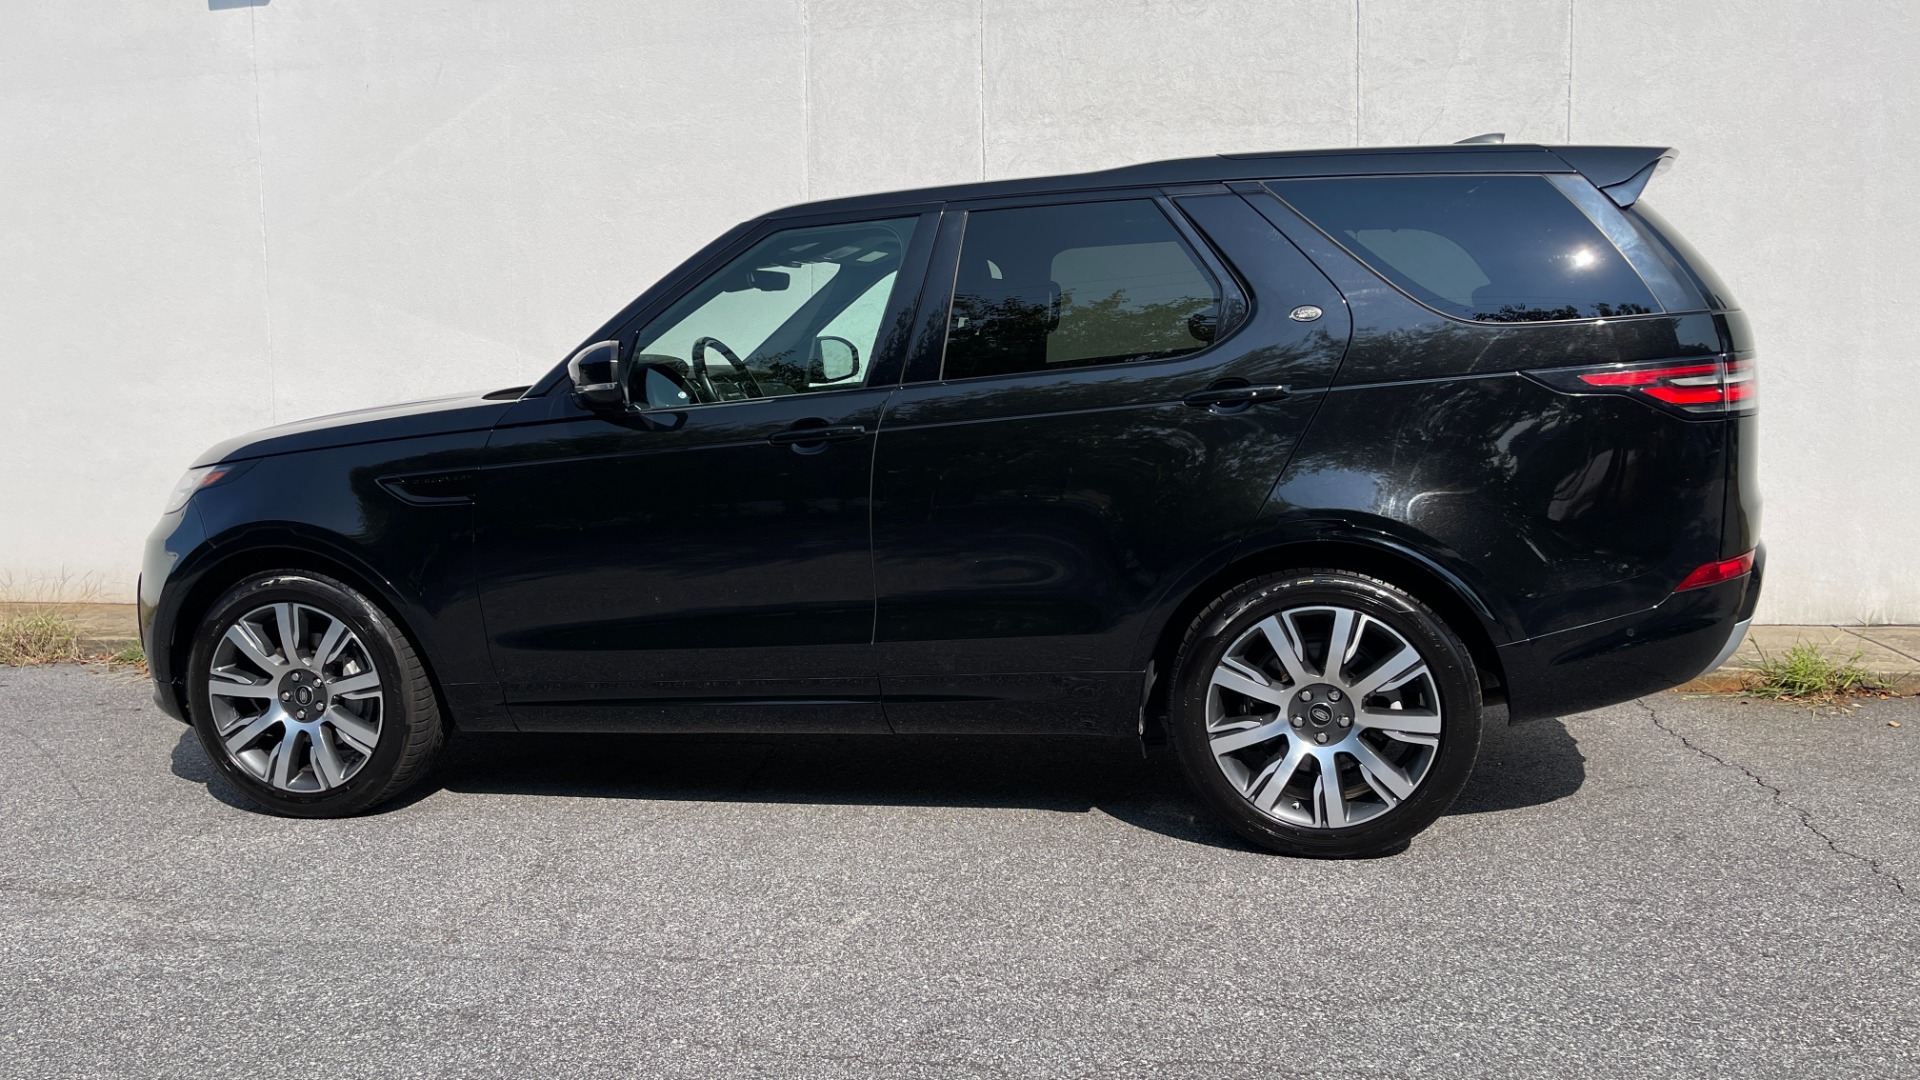 Used 2019 Land Rover Discovery HSE / SEVEN SEAT / DYNAMIC PACKAGE / 21IN WHEELS / REMOTE SEAT PACKAGE for sale $46,495 at Formula Imports in Charlotte NC 28227 9